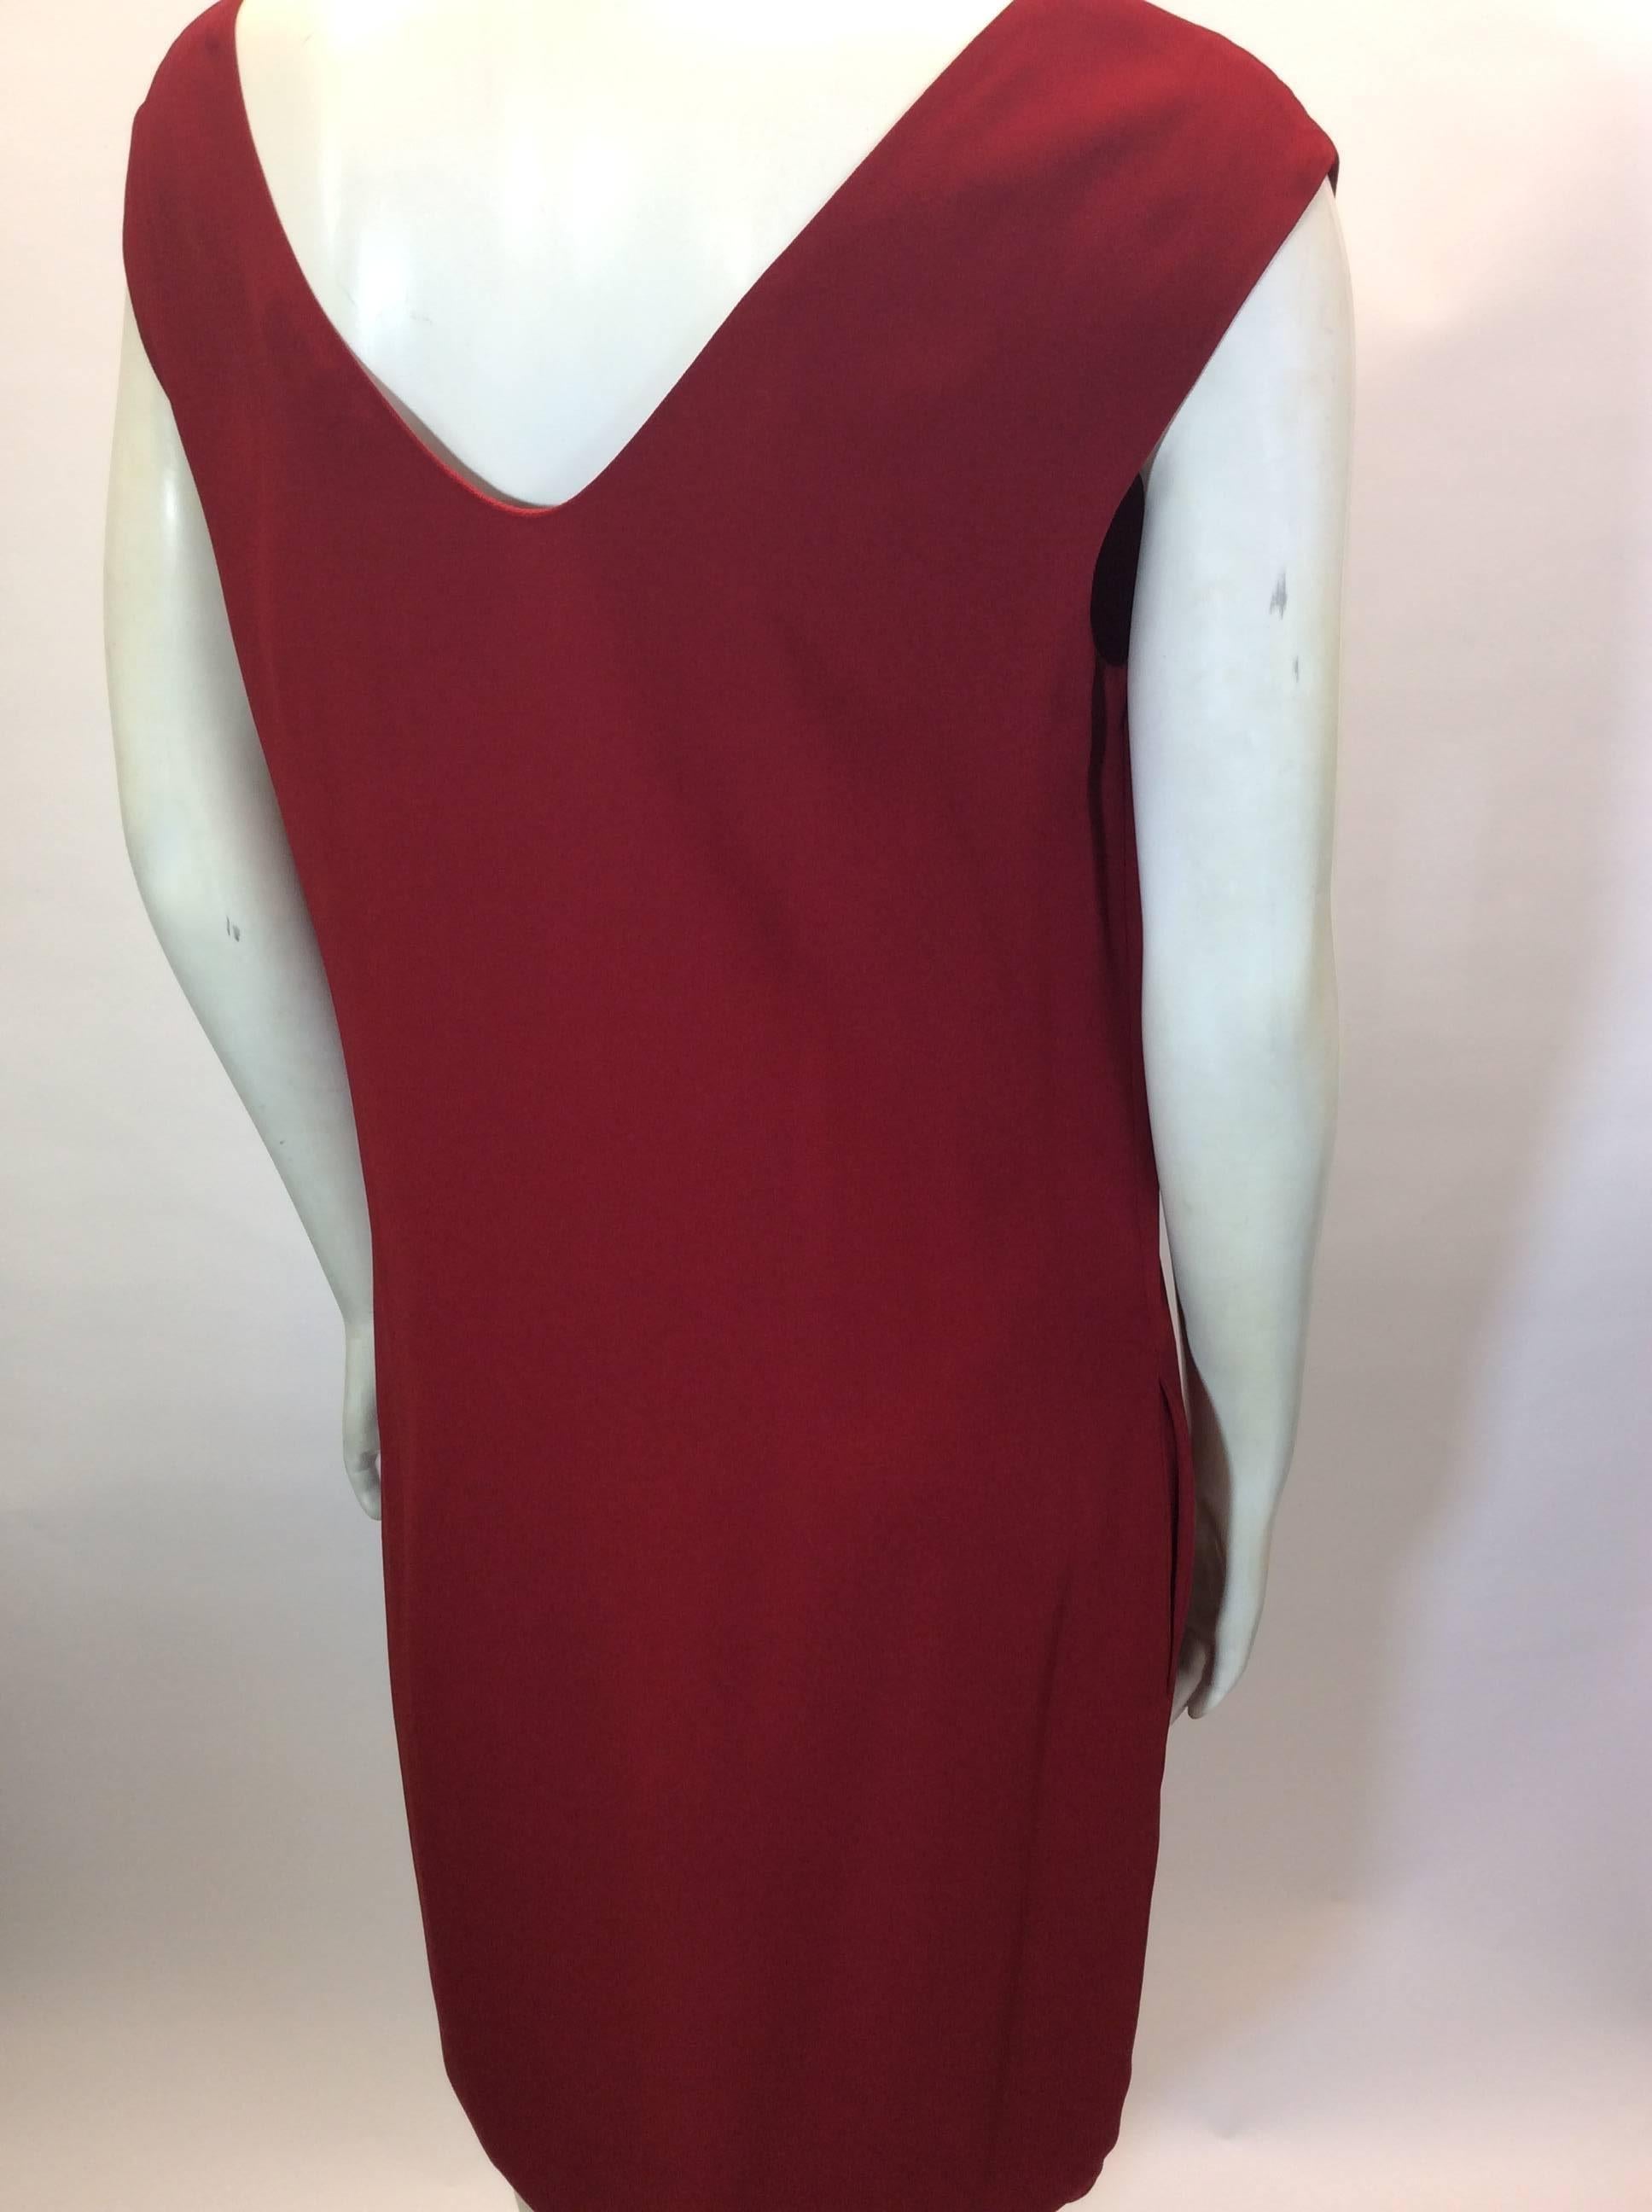 Chloe Red V-Neck Sheath Dress In Excellent Condition For Sale In Narberth, PA